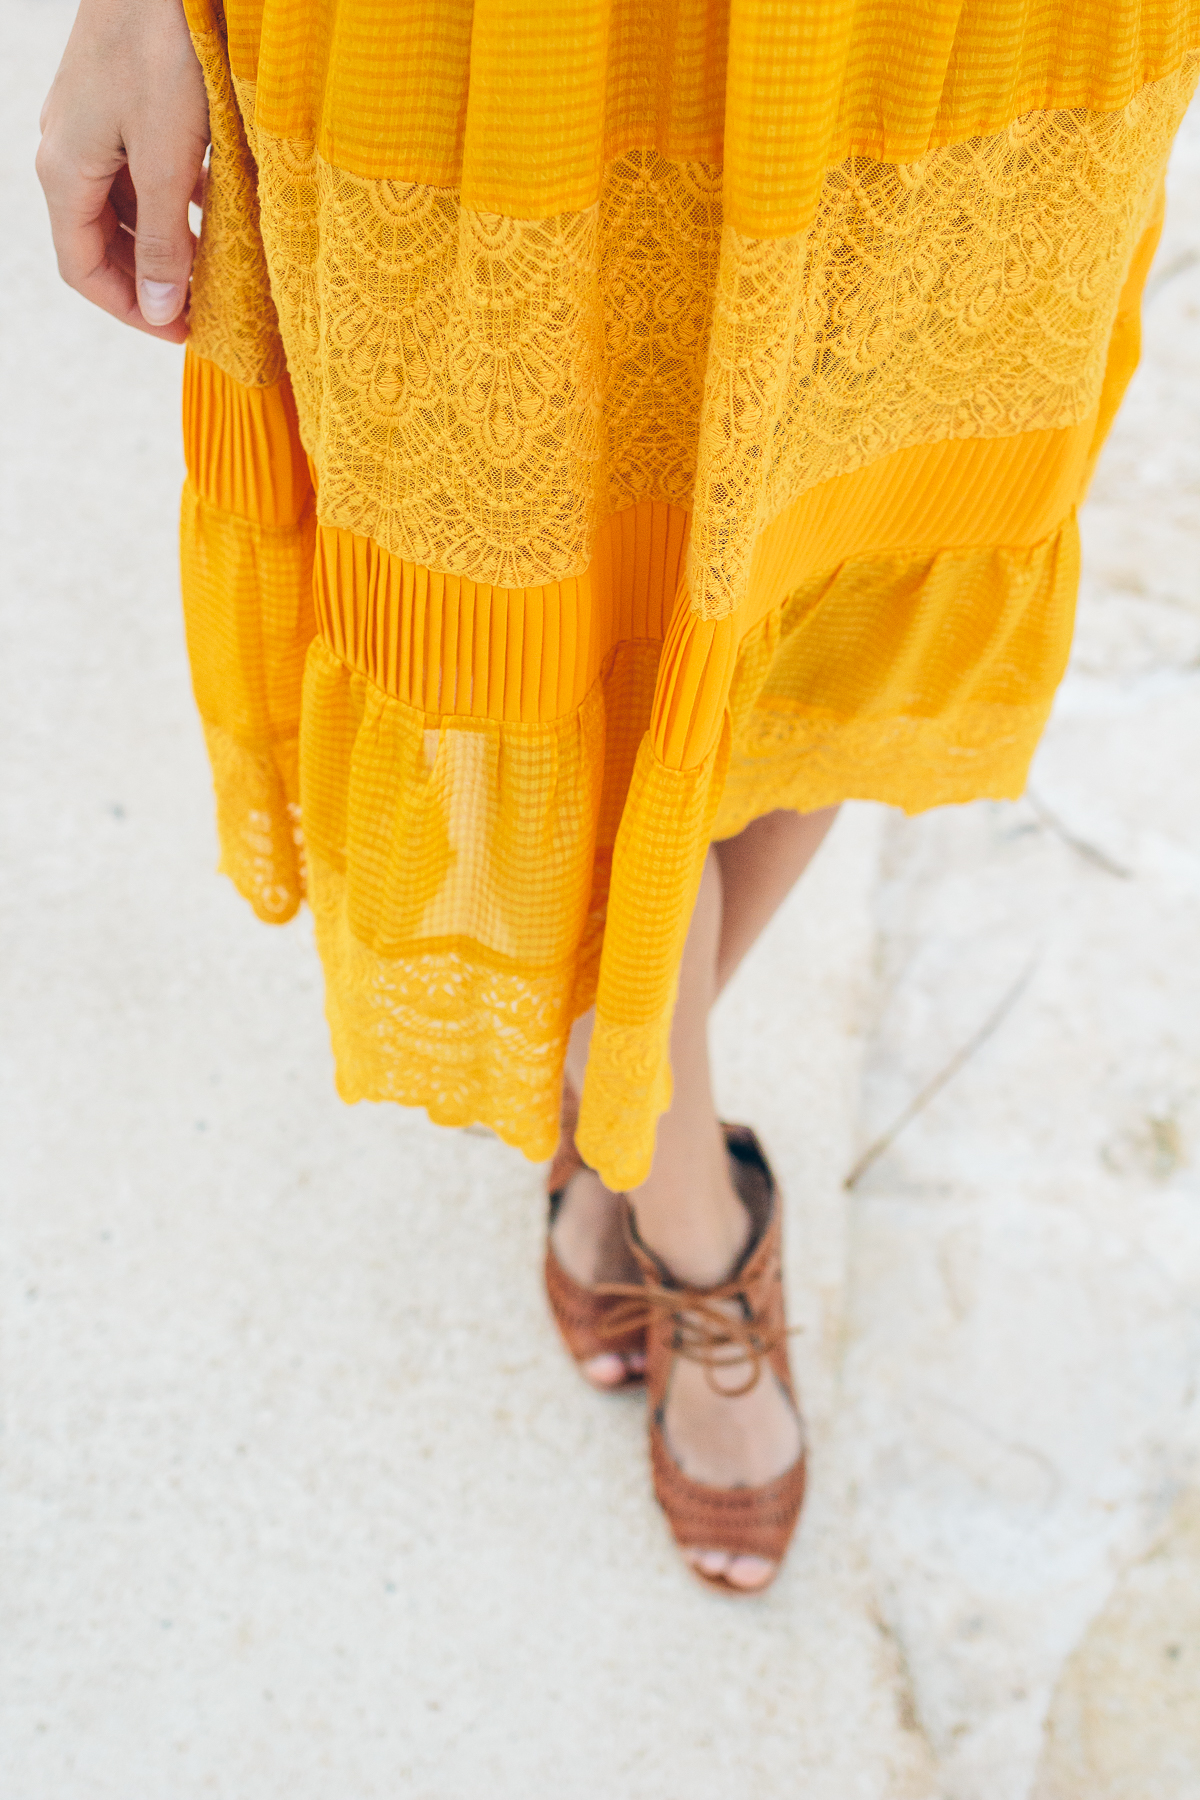 villanelle lace dress, anthropologie lace dress, yellow dress, spring outfit, blogger outfit, fashion blogger outfit — via @TheFoxandShe